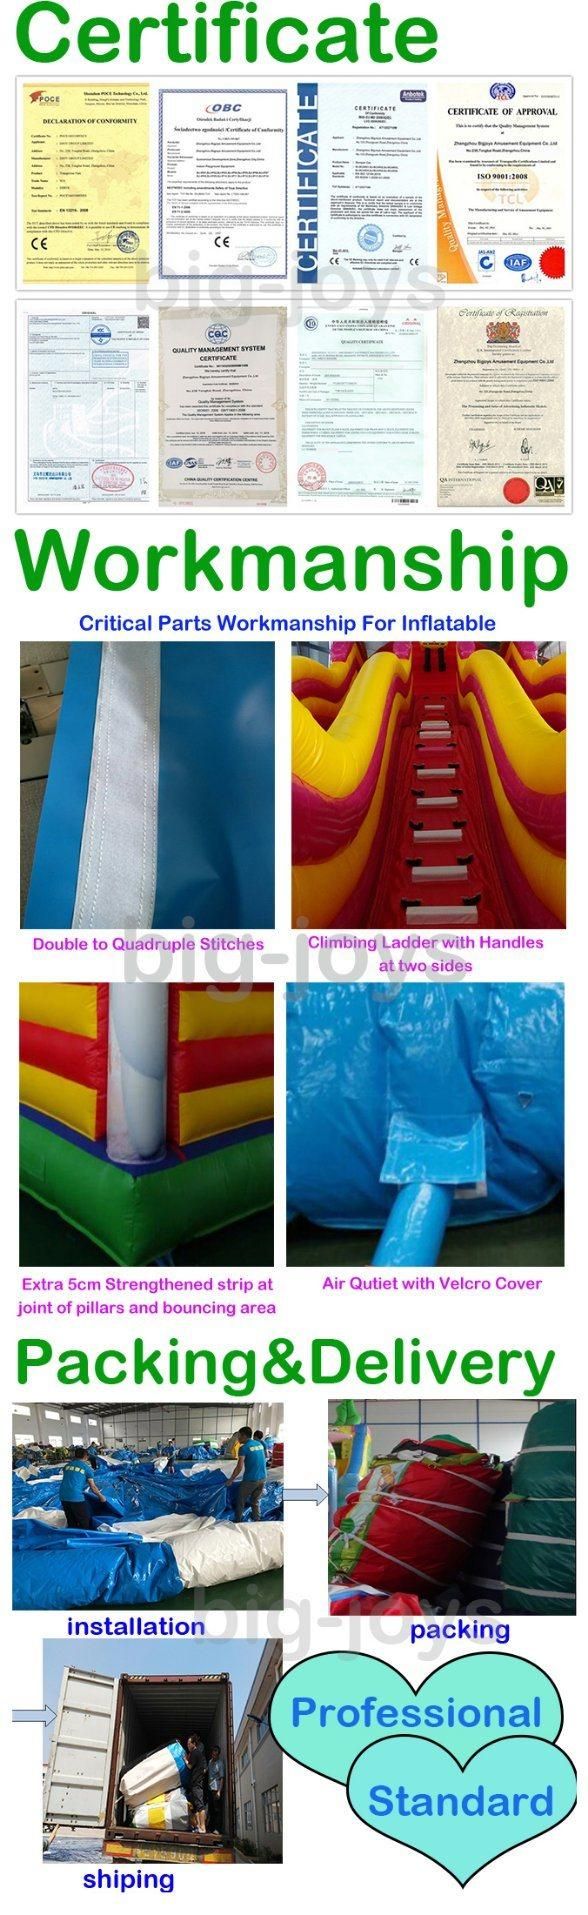 PVC Inflatable Double /Single Line Colorful Dragon Boat with Cheap Price for Sales